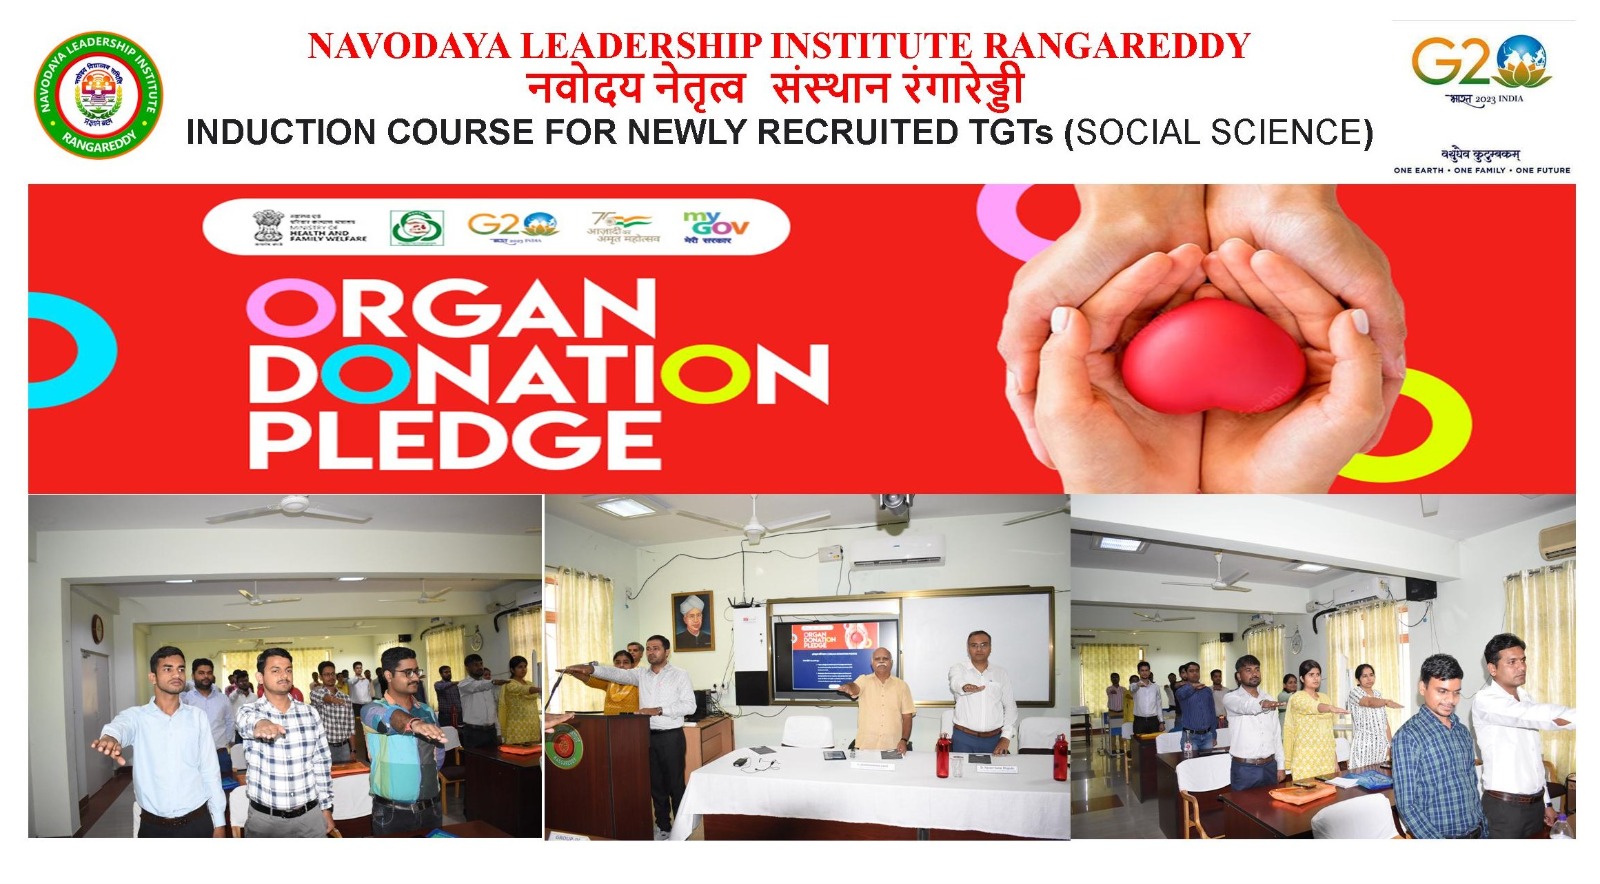 ORGAN DONATION PLEDGE WITH TGT SOCIAL SCIENCE INDUCTION TRAINEES